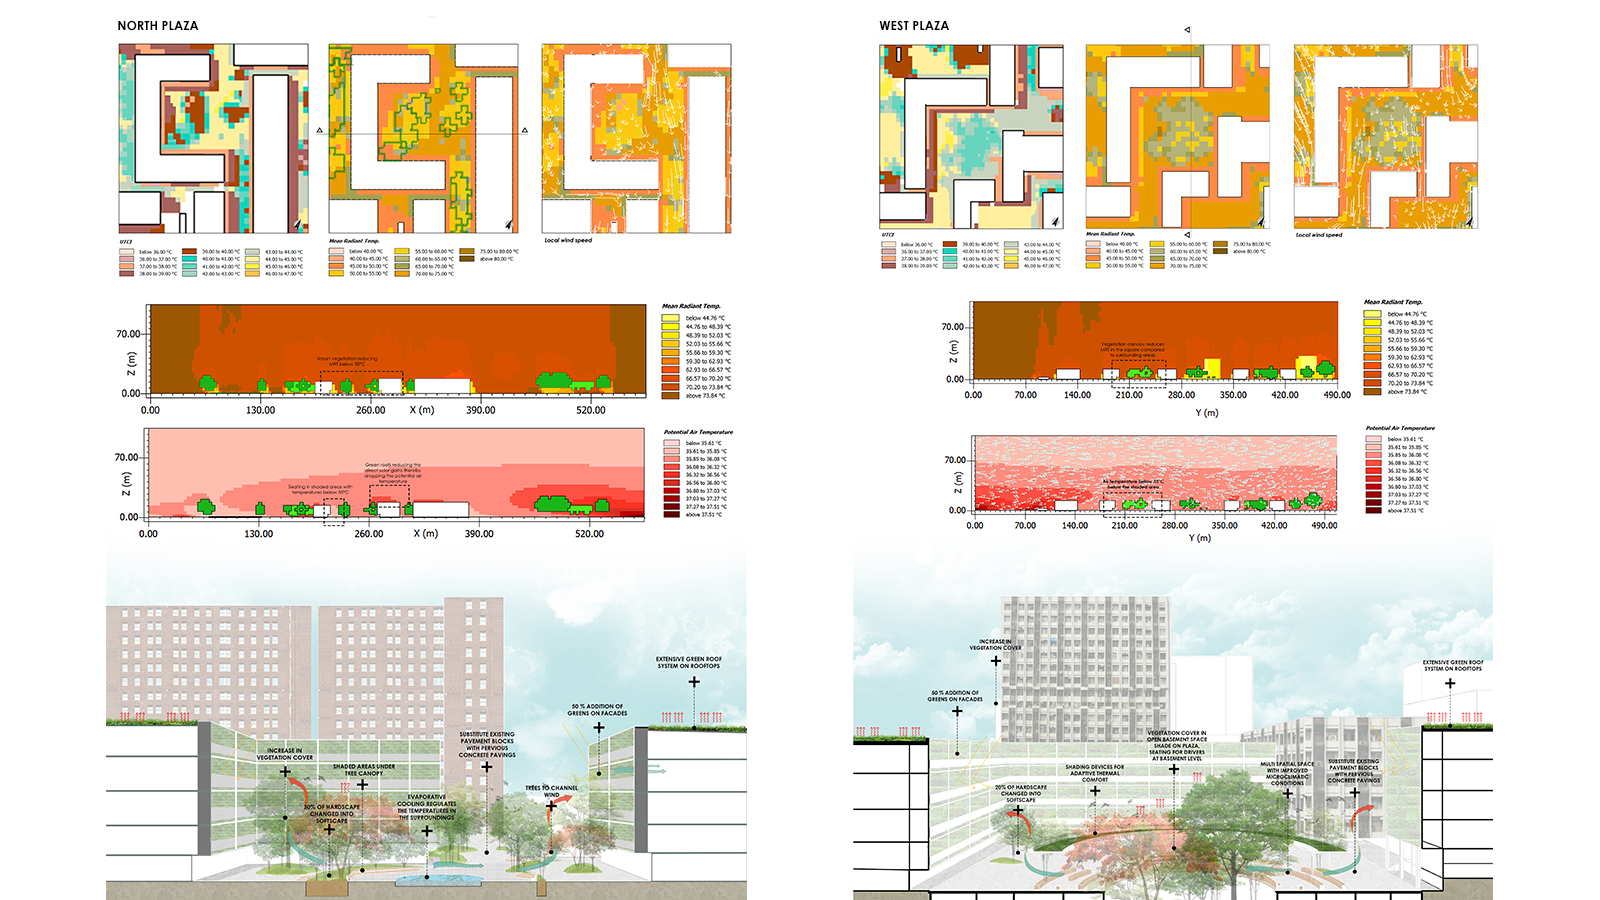 Leading software for high-resolution 3D modeling of urban microclimate to analyze the impact of buildings, vegetation, etc. on the urban climate with the aim of planning climate-friendly cities and improving the quality of life in metropolitan areas - designed for professional use by architects, landscape architects, urban planners etc., as well as for research at universities.